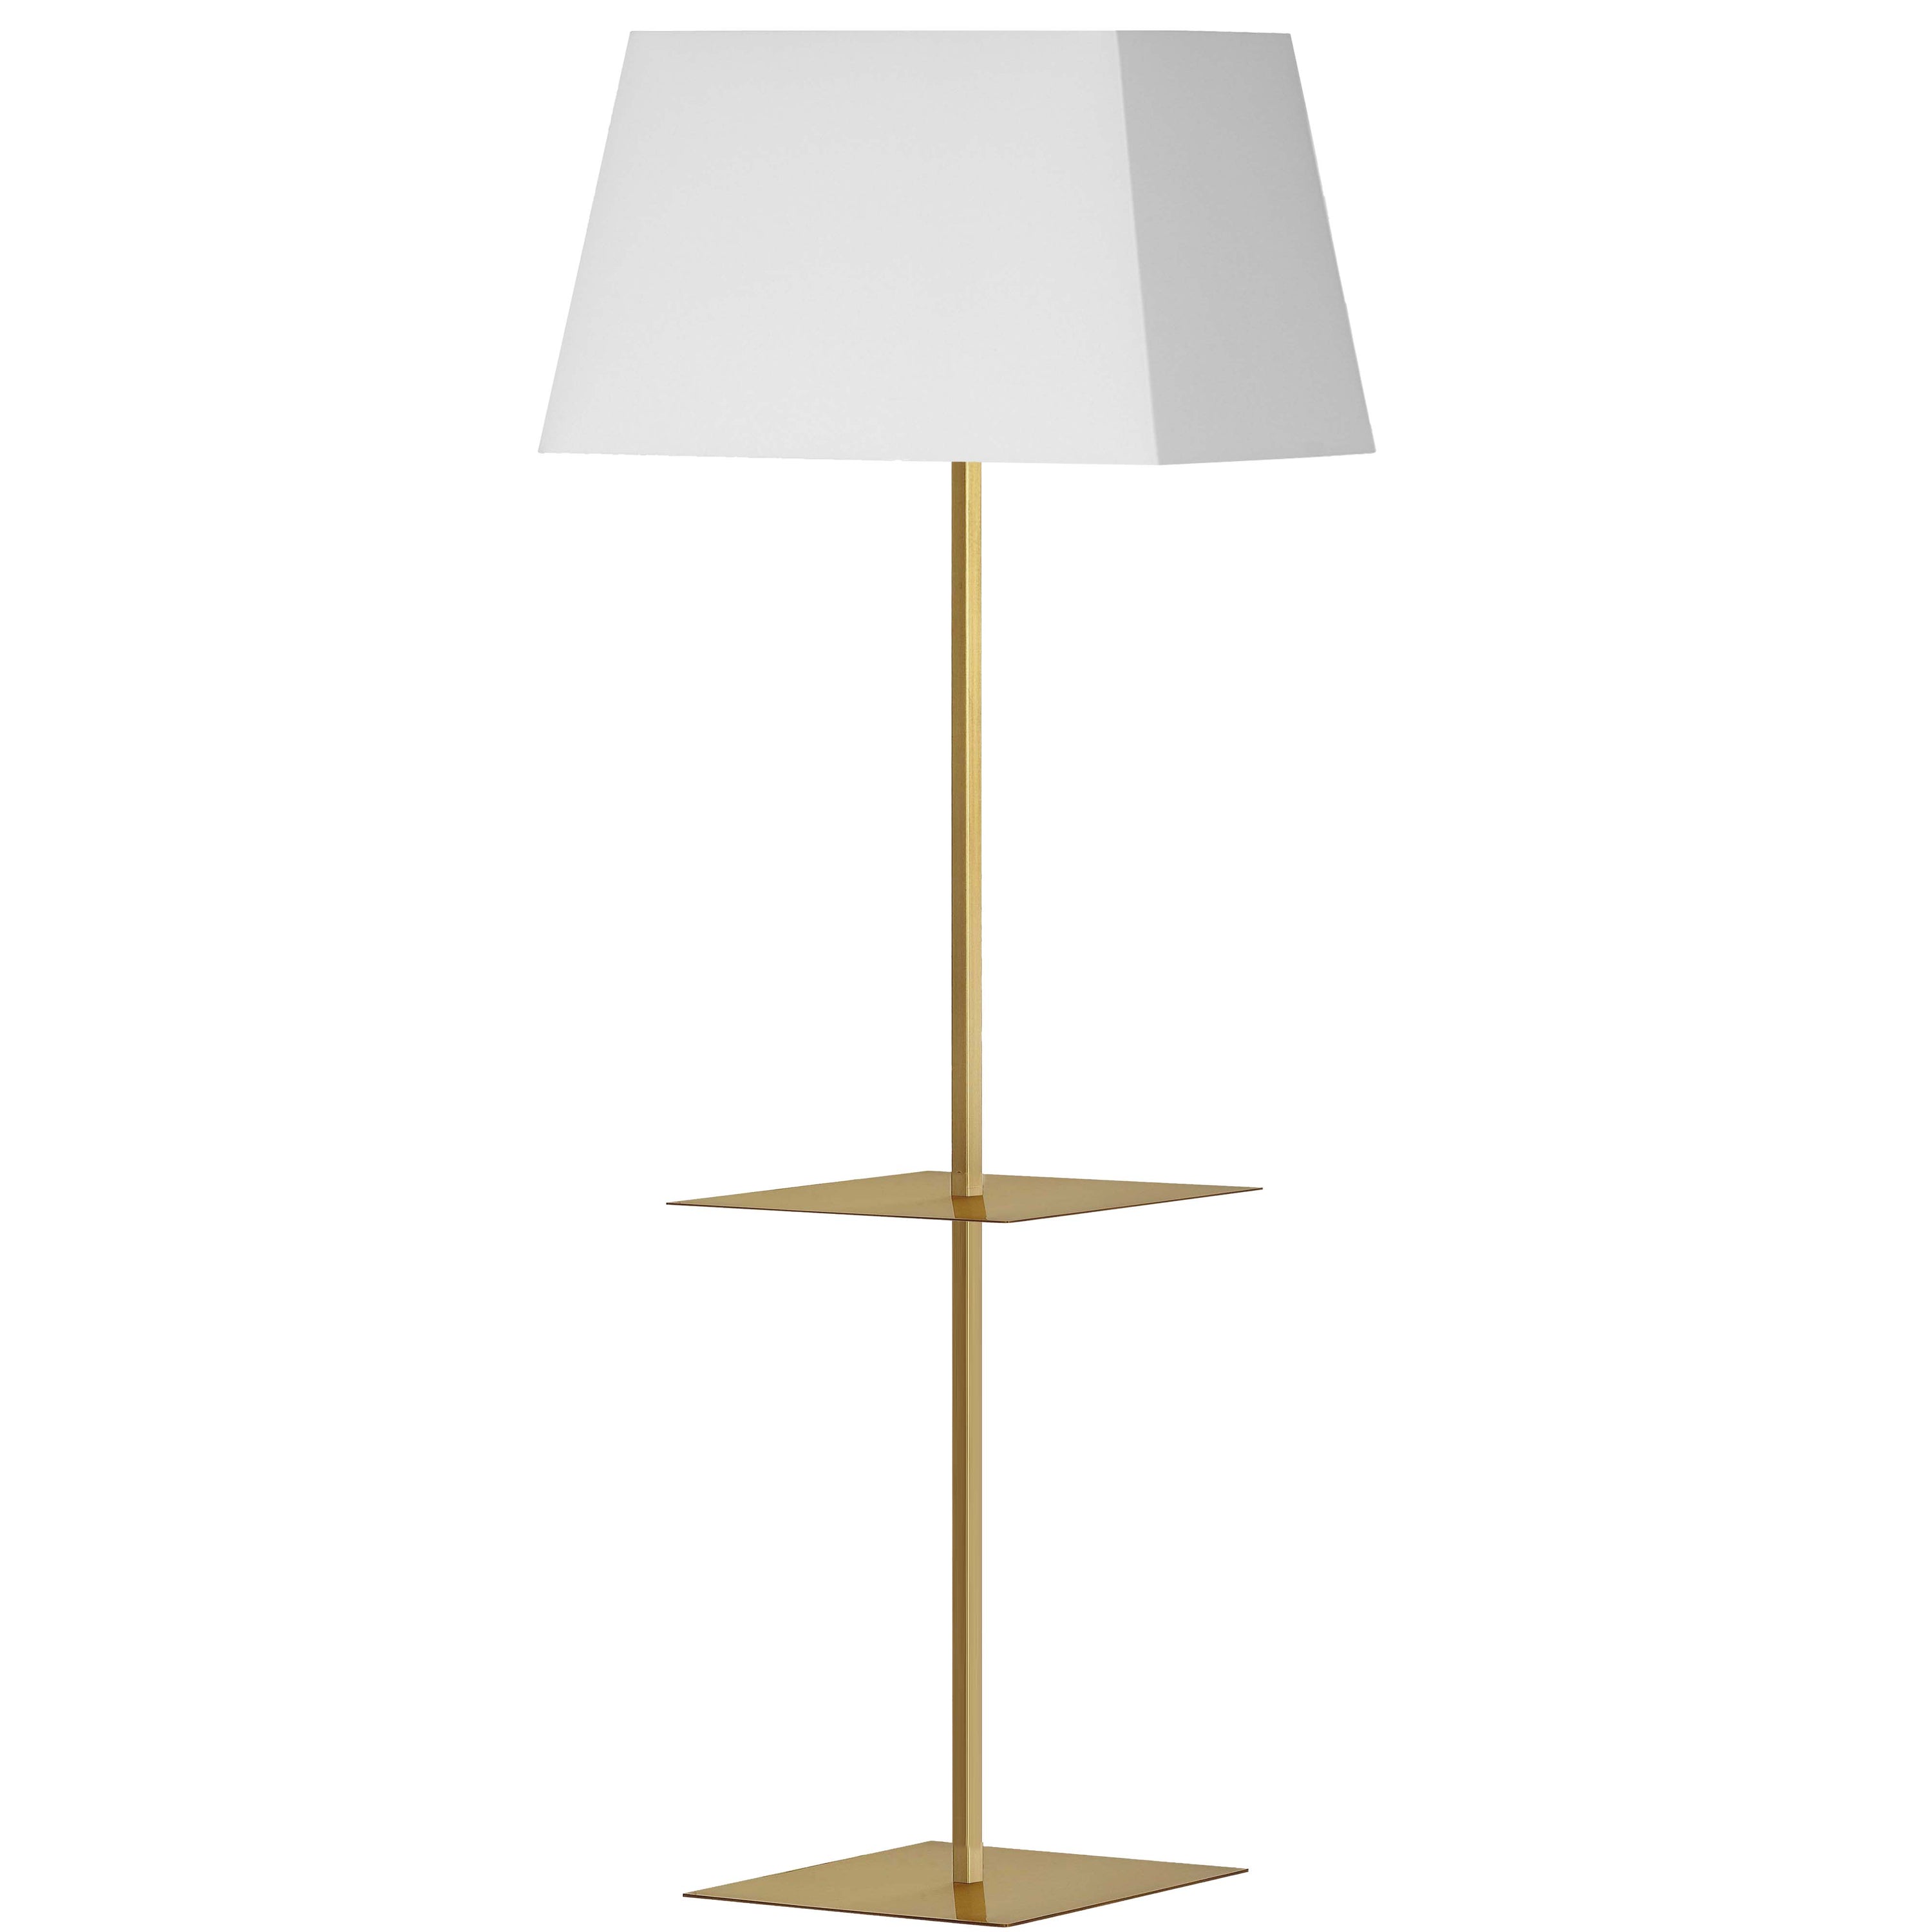 Dainolite GTC-S641F-AGB-WH 1 Light Incandescent Square Base Floor with Shelf Aged Brass with White Shade